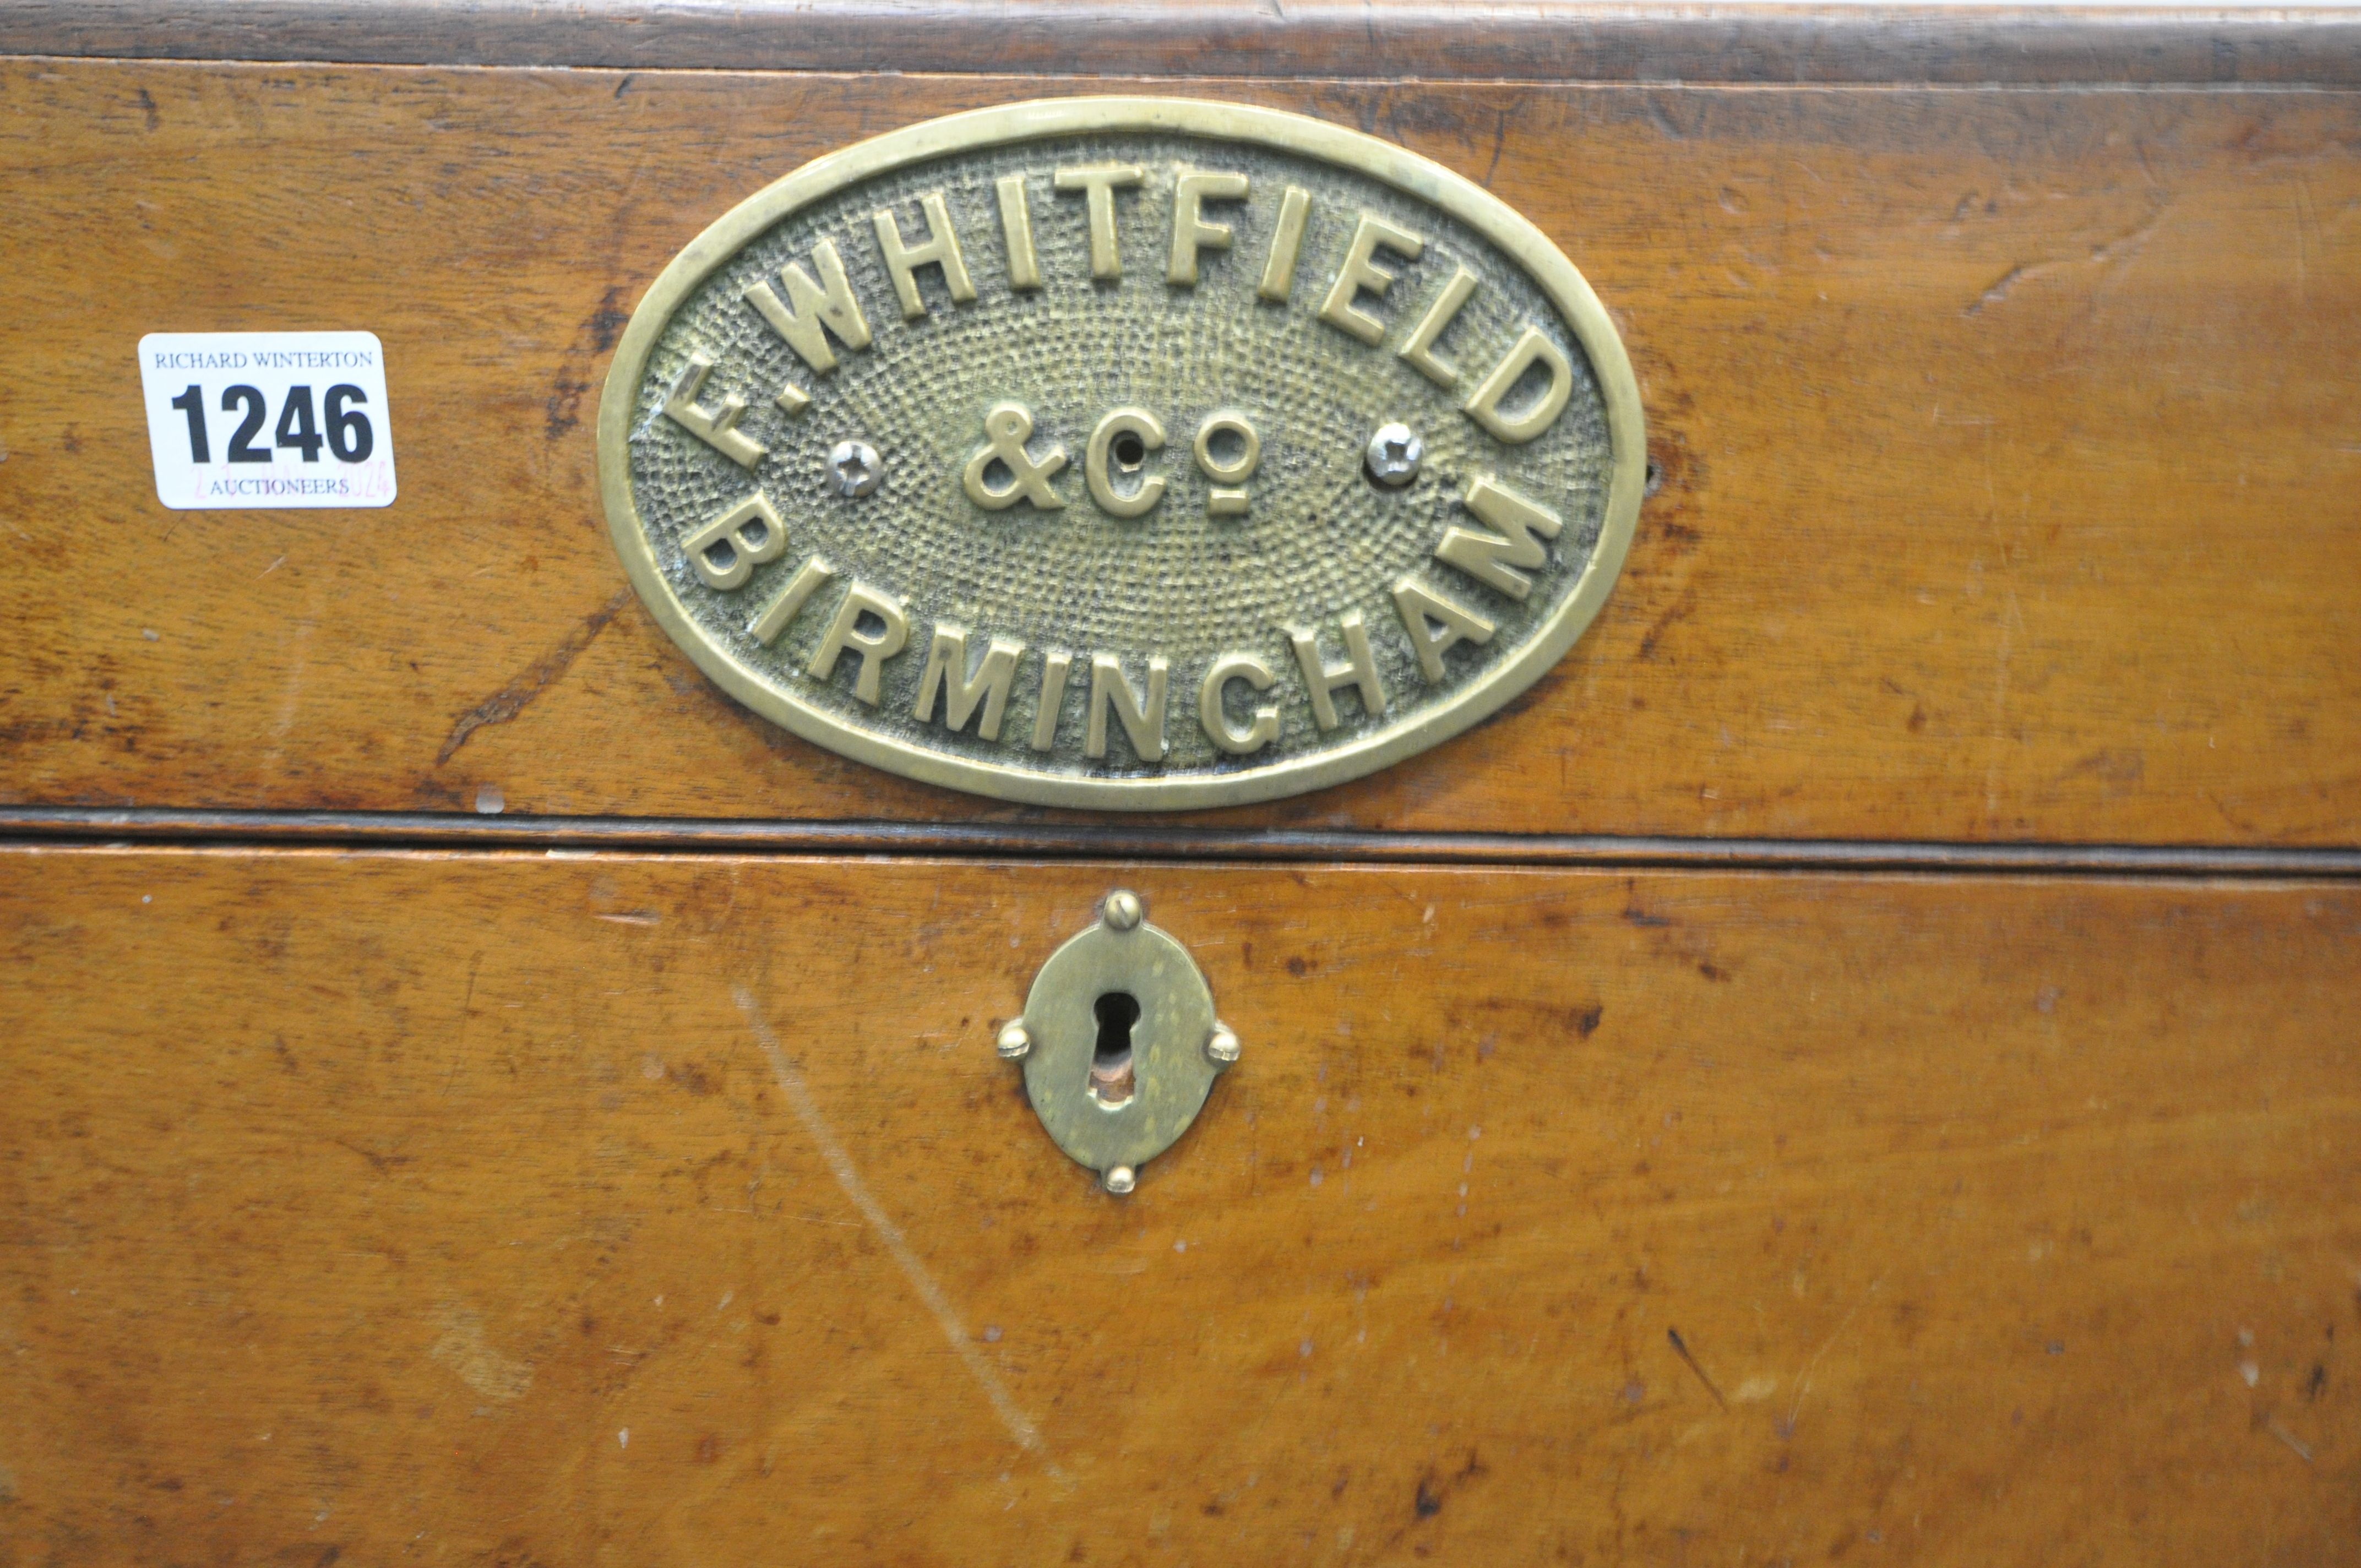 A LATE 19TH CENTURY WALNUT BLANKET CHEST, bearing a brass label reading Whitfield & Co, - Image 3 of 5